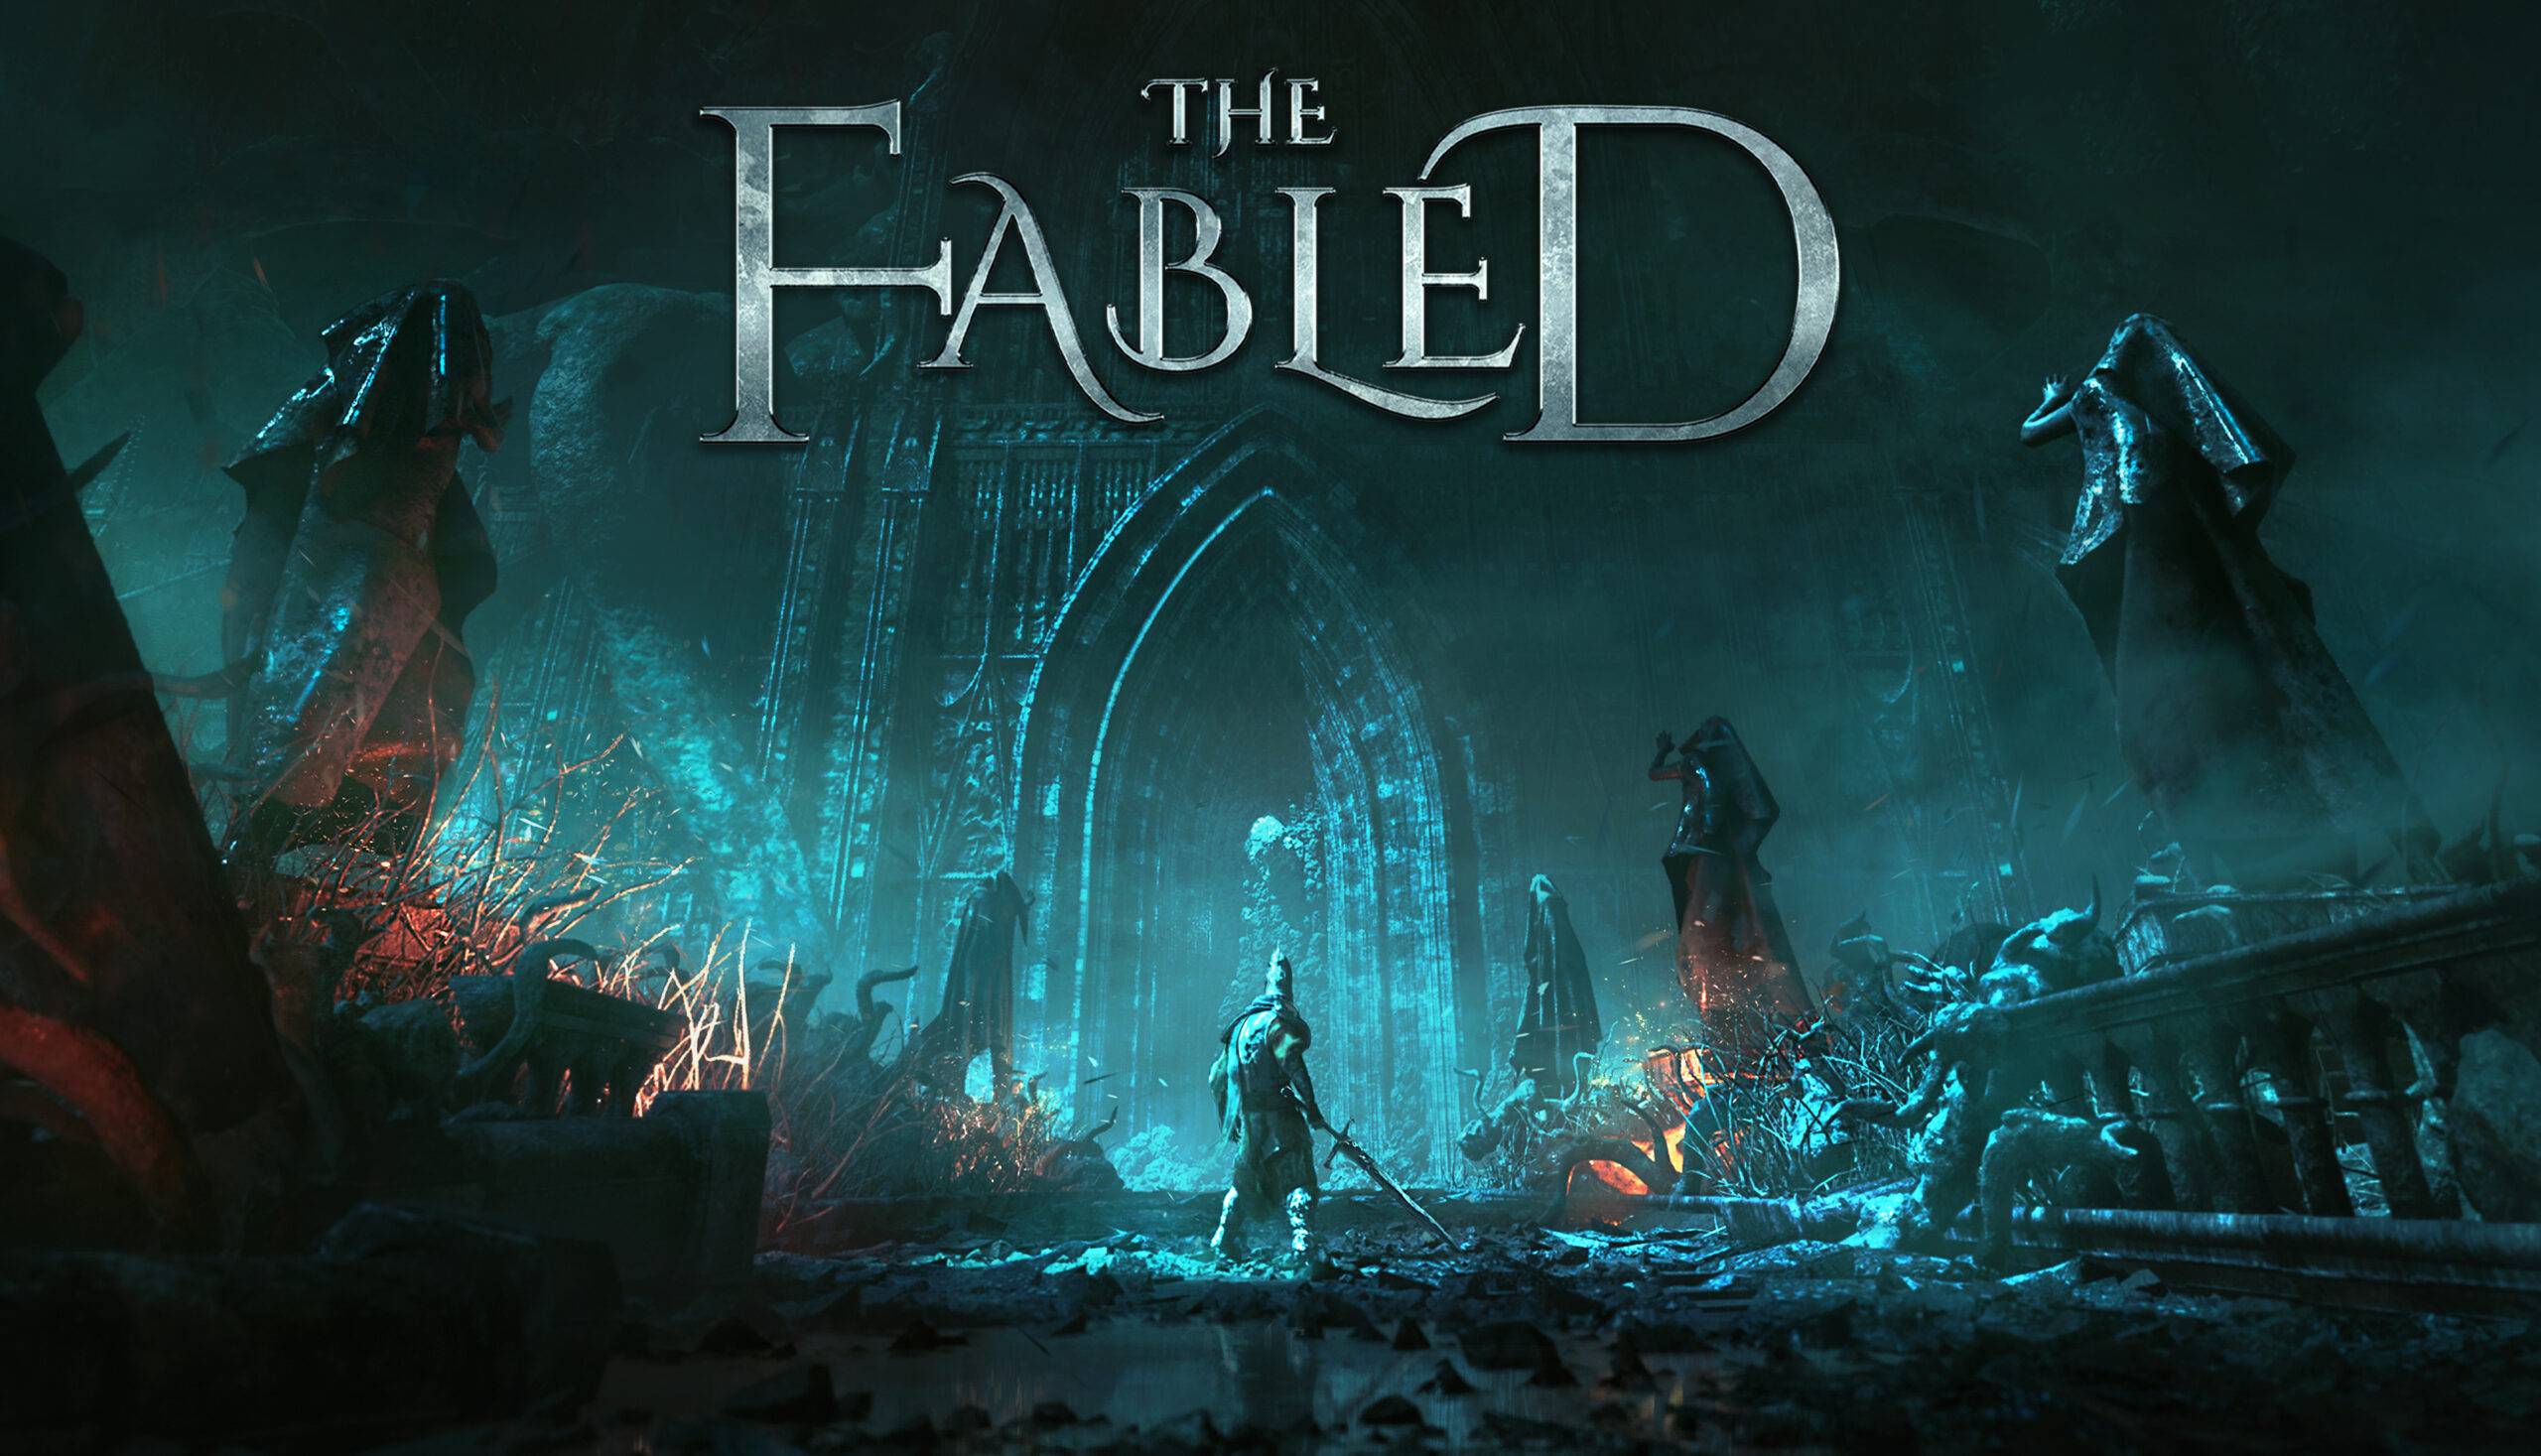 The Fabled - Oyun İncelemesi